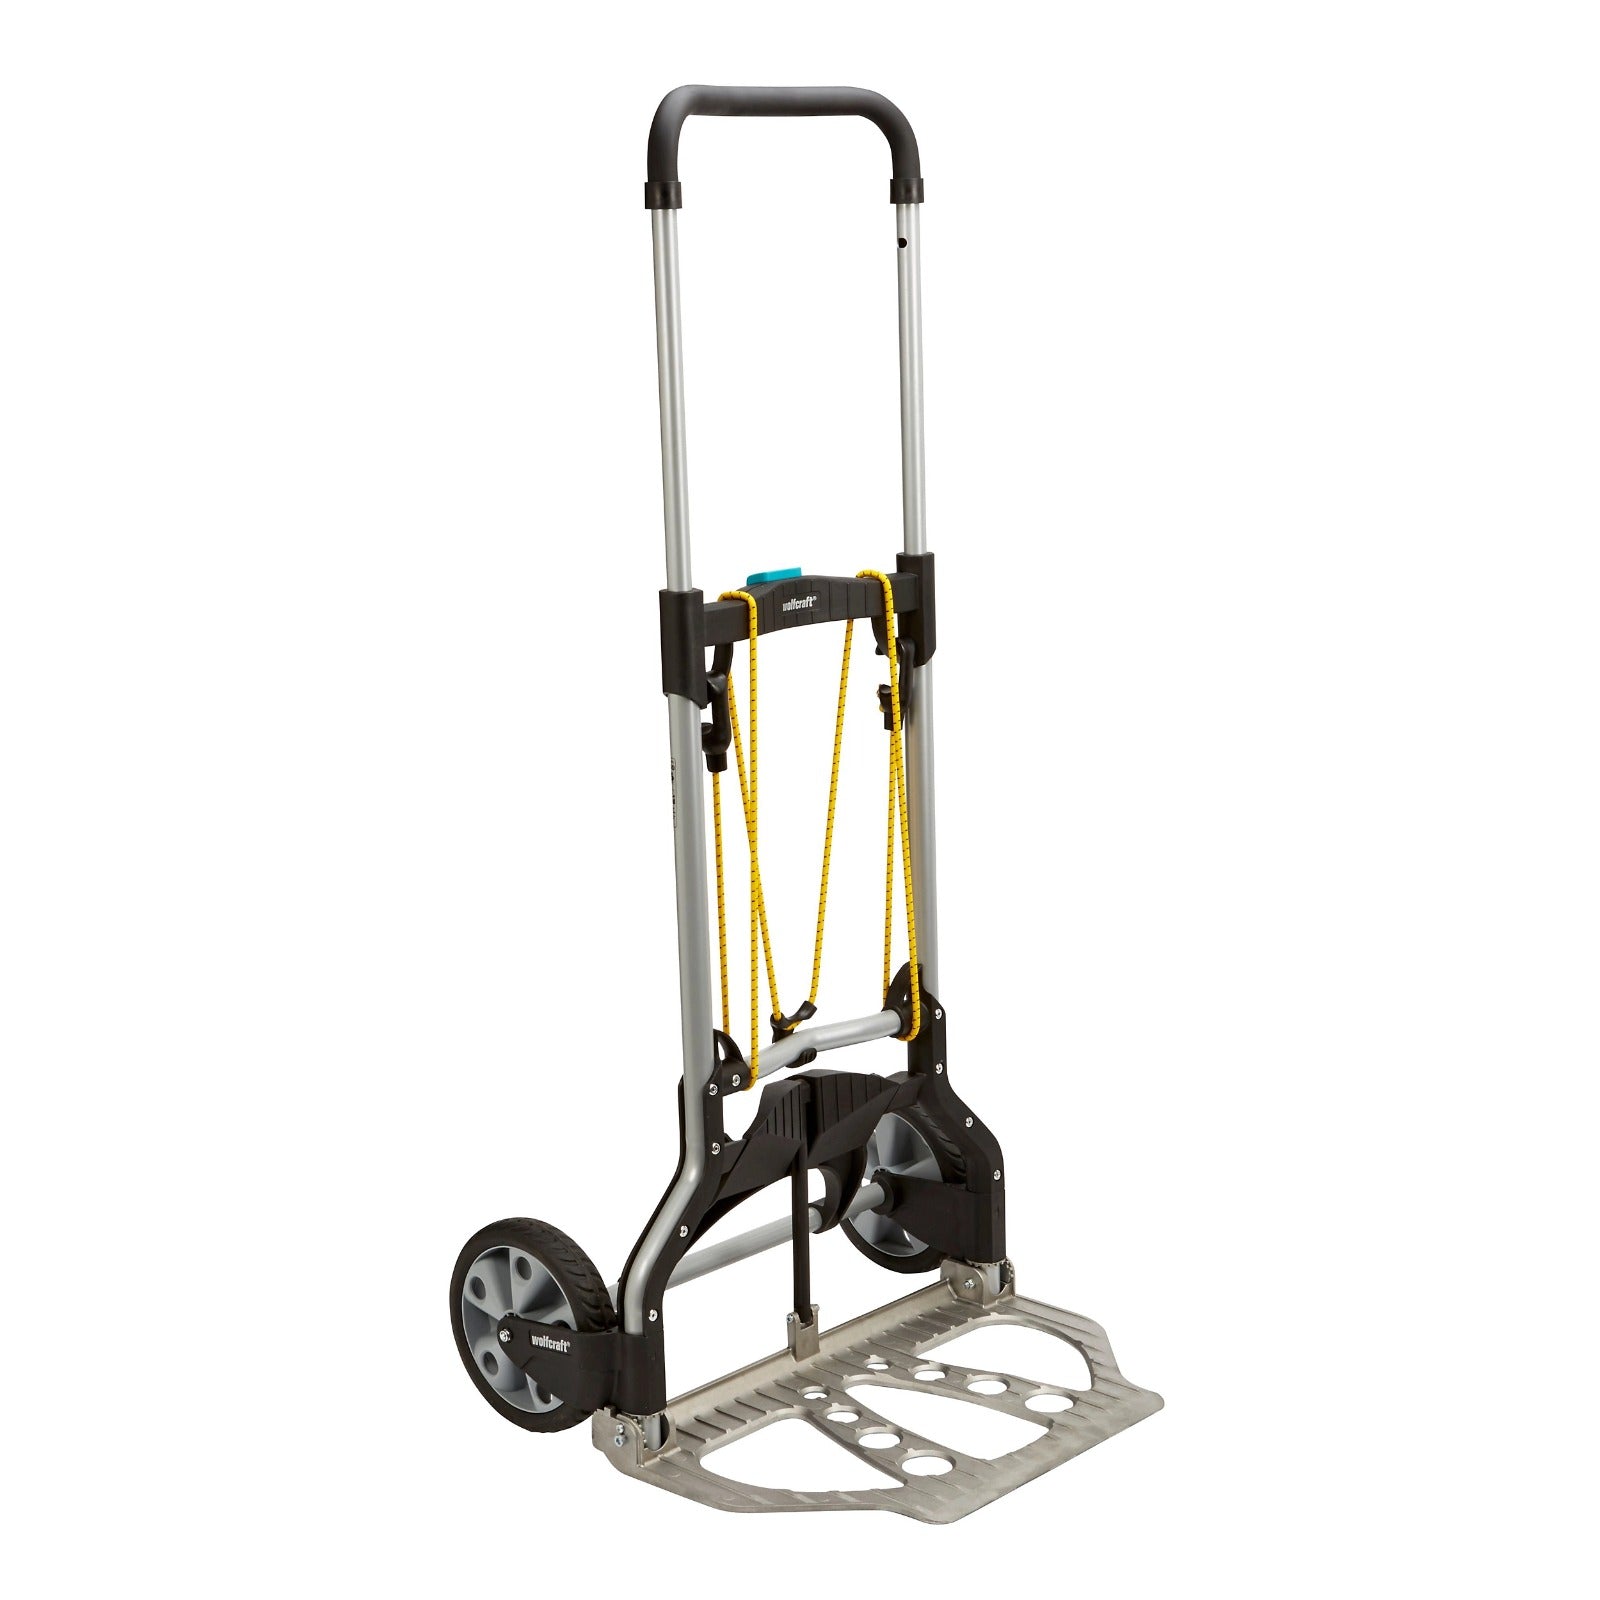 Wolfcraft Foldable Hand truck, 100kg capacity - 0100